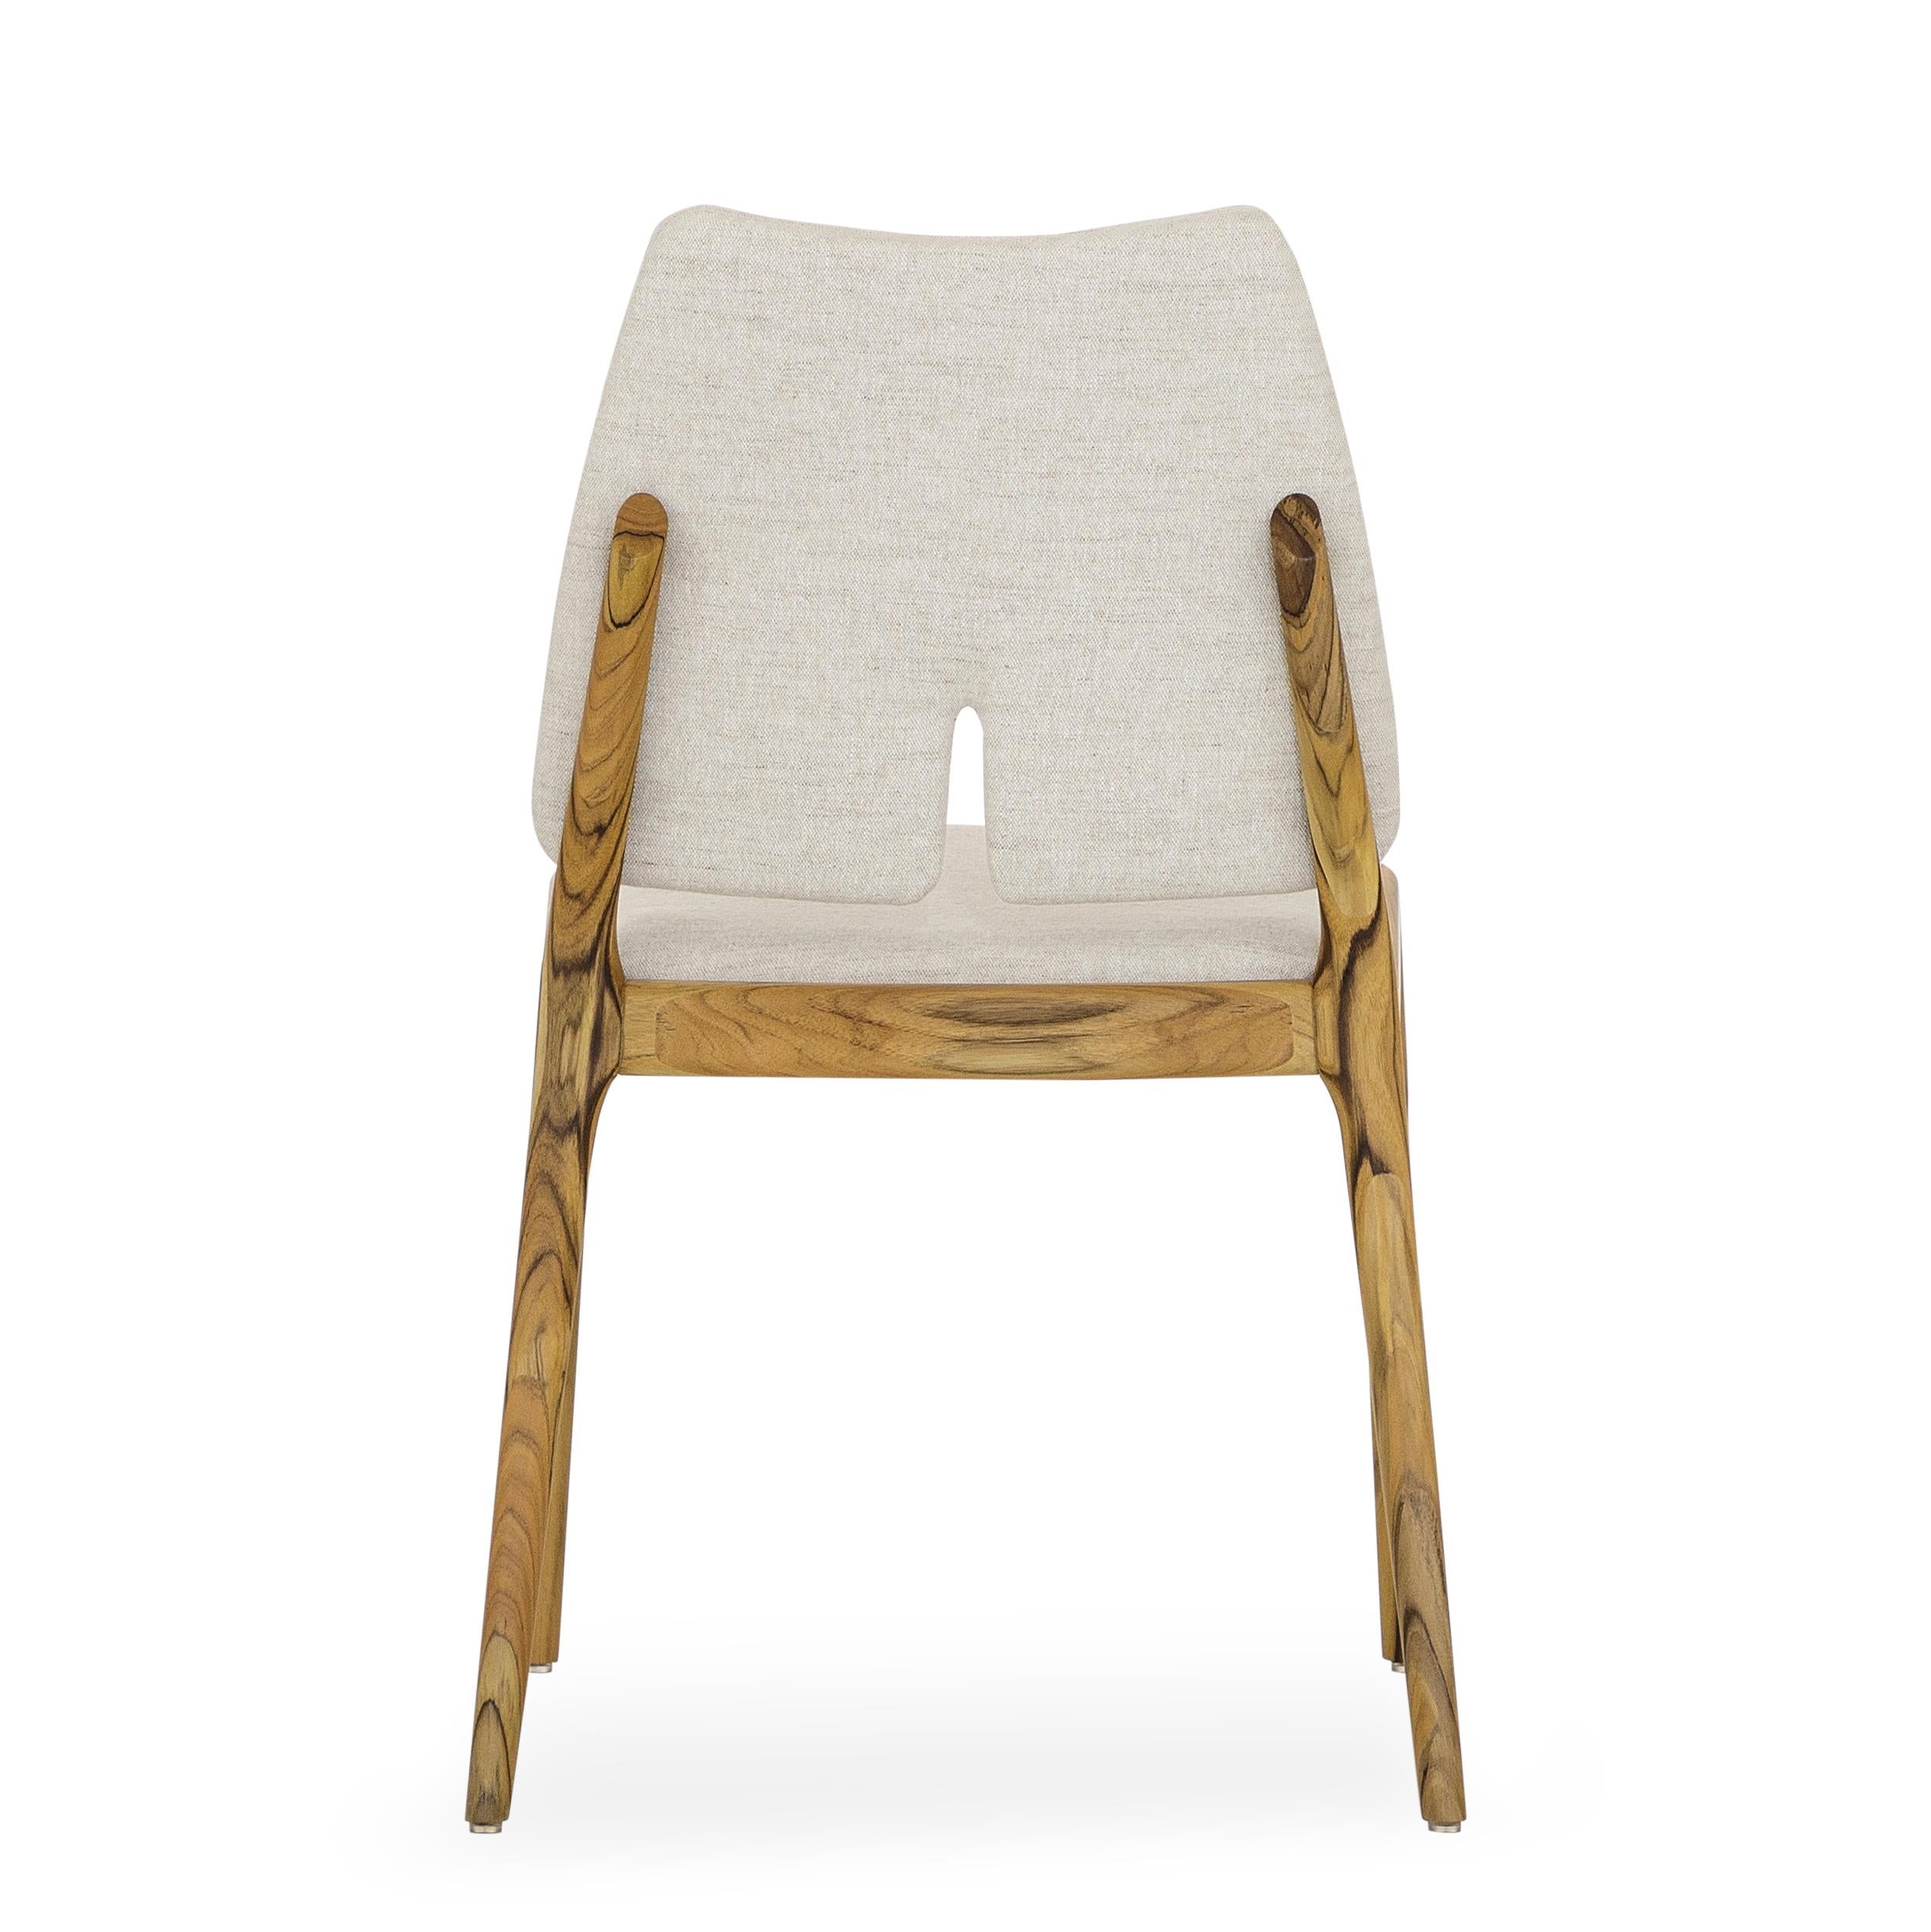 Slit Dining Chair in Teak Wood Finish and Light Beige Cotton Fabric, Set of 2 In New Condition For Sale In Miami, FL